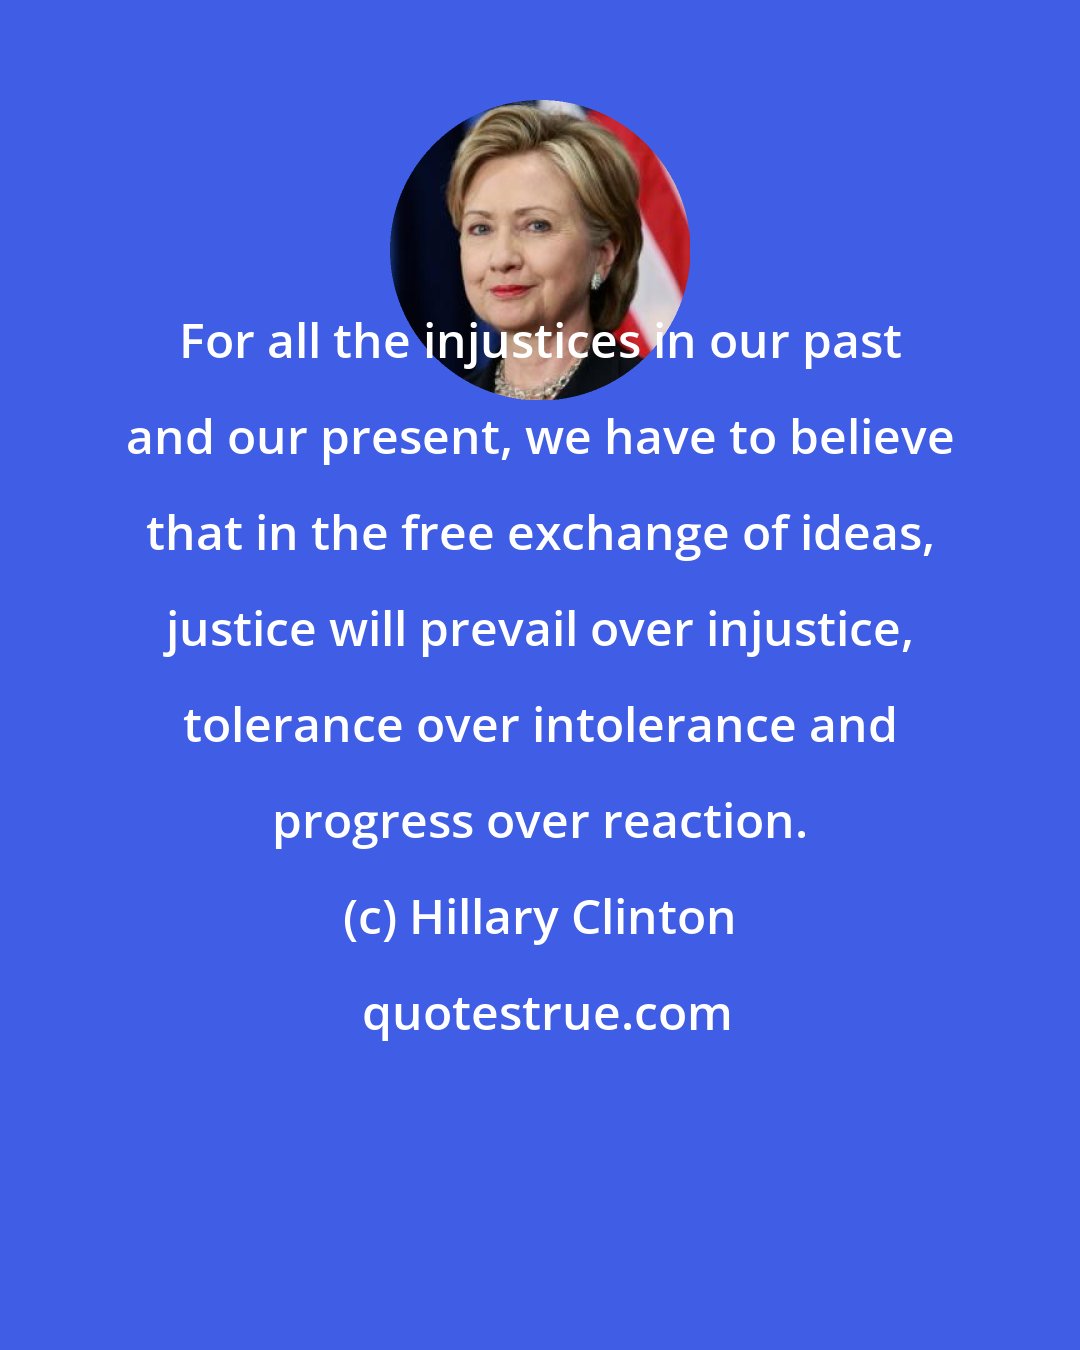 Hillary Clinton: For all the injustices in our past and our present, we have to believe that in the free exchange of ideas, justice will prevail over injustice, tolerance over intolerance and progress over reaction.